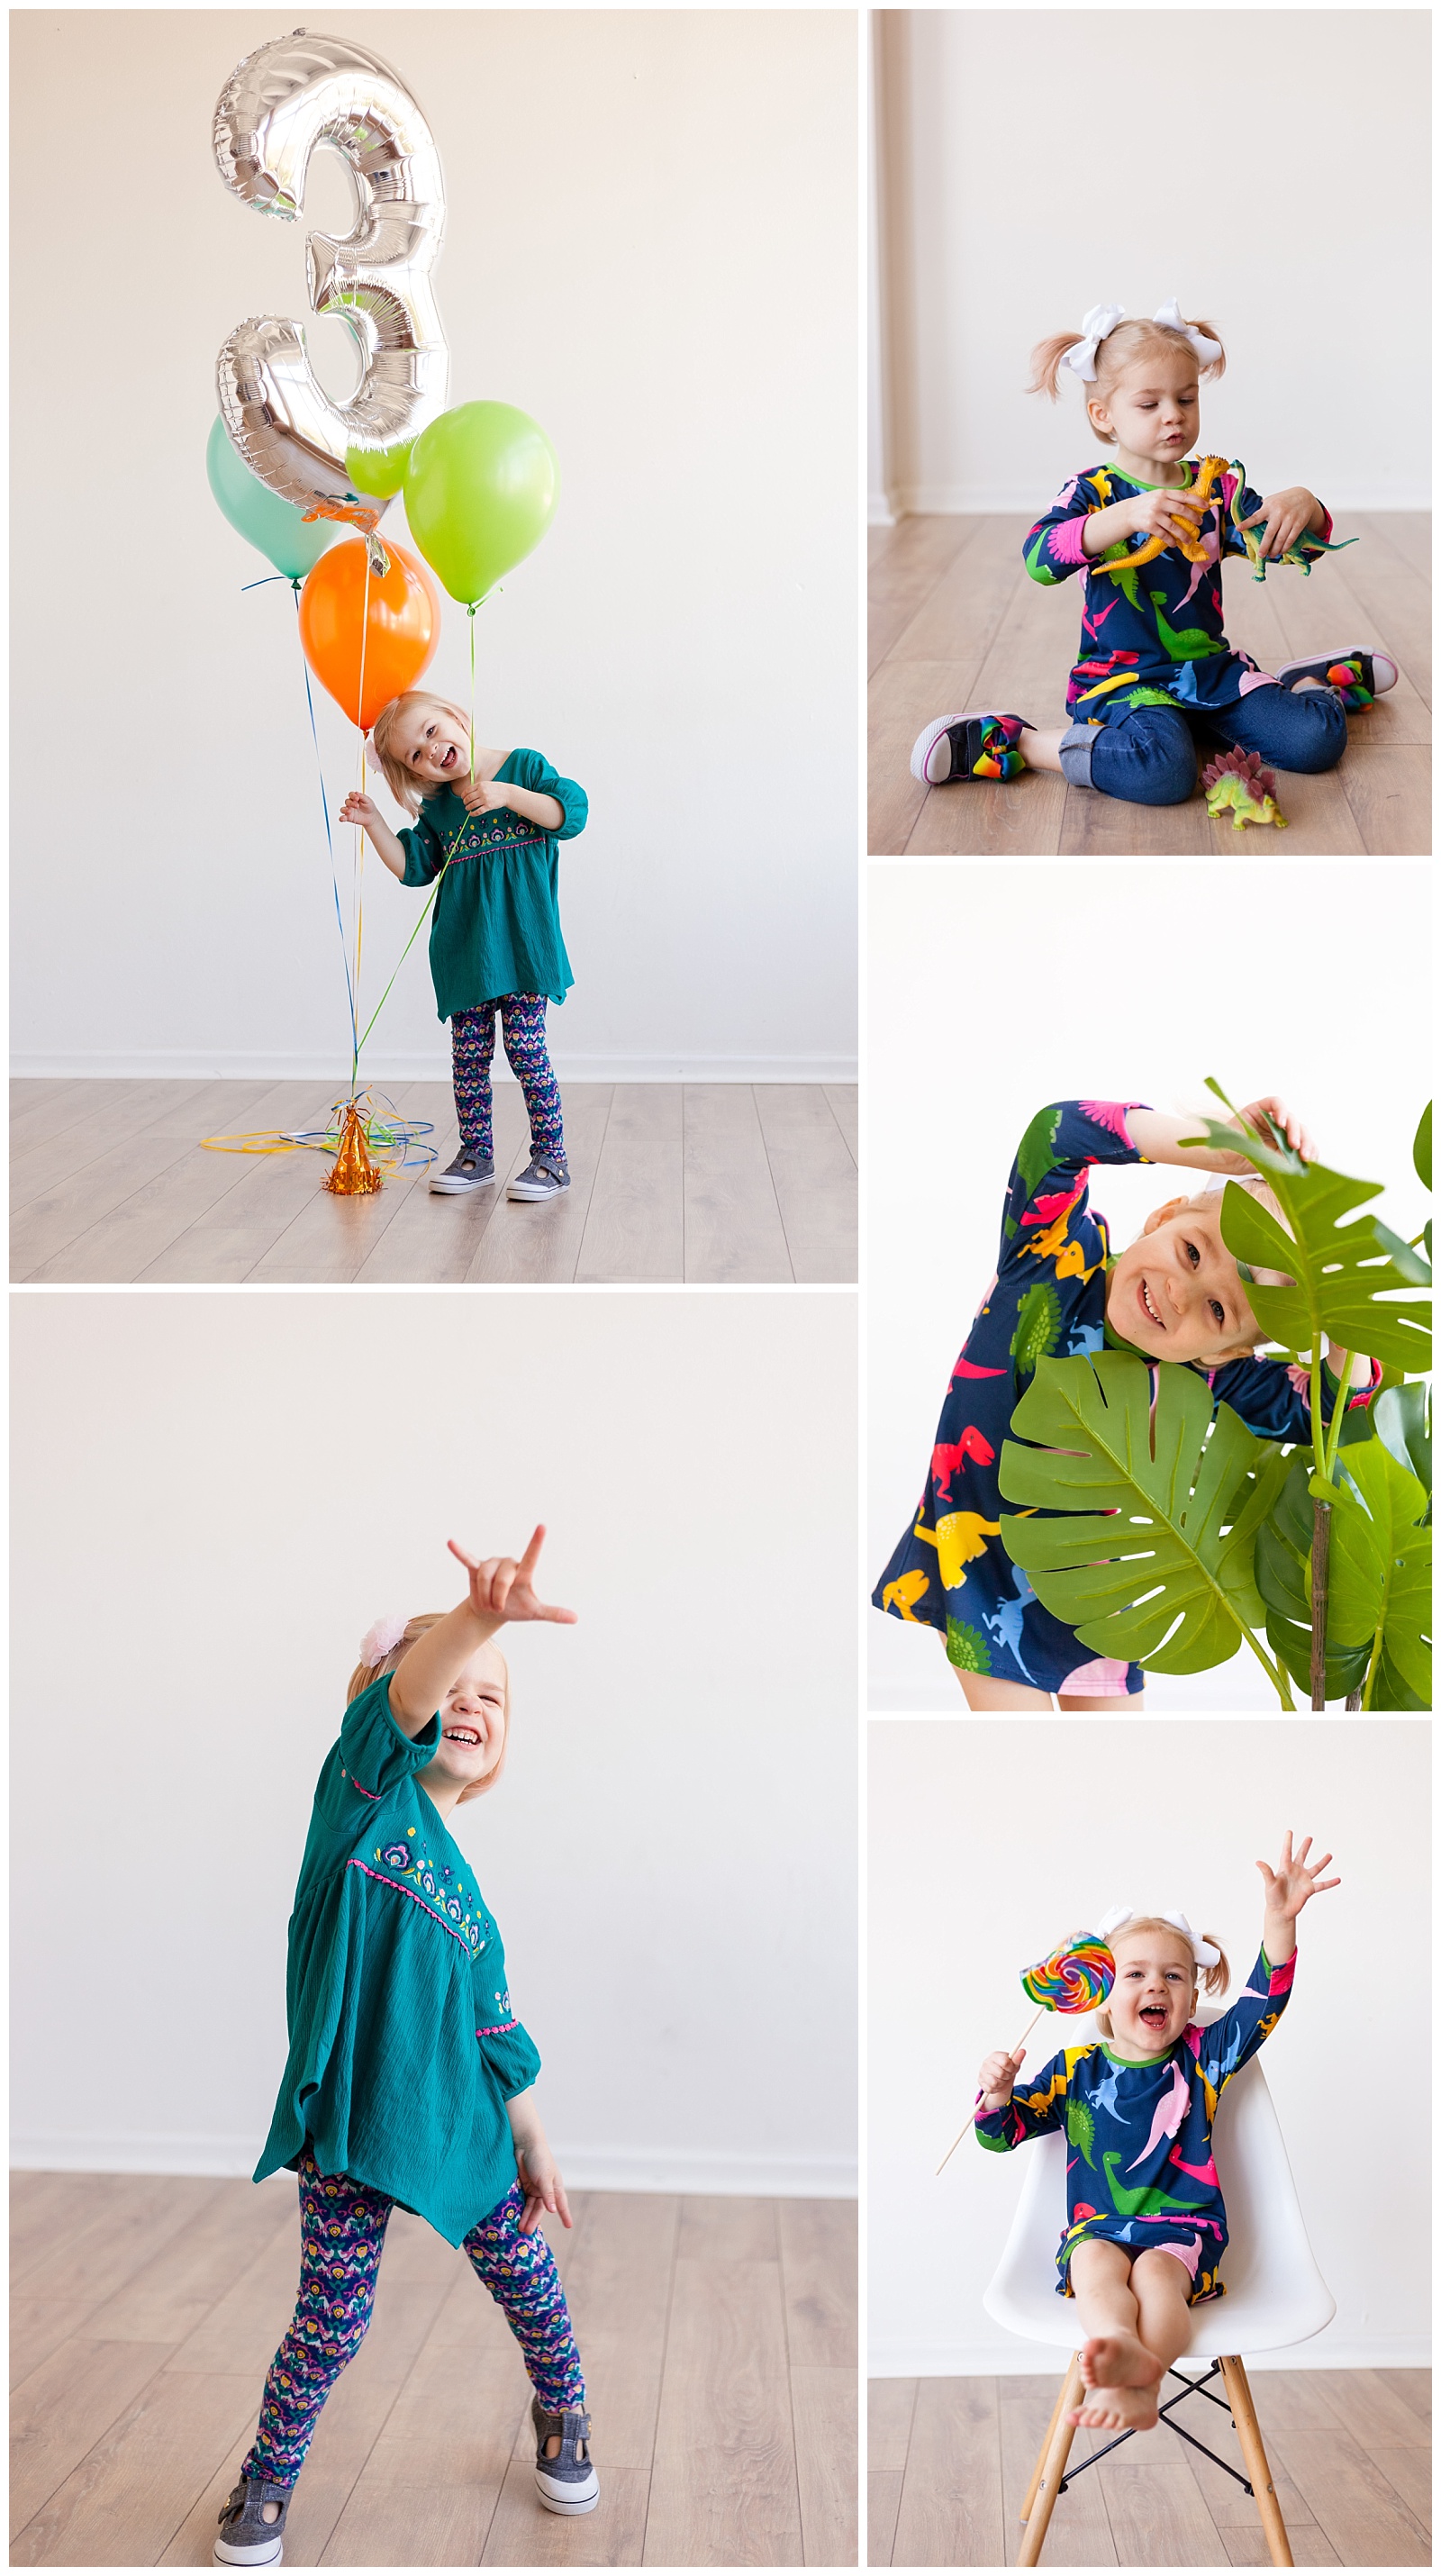 Third birthday photoshoot at The Lumen Room in Dallas Texas by Alyssa Grace Photography